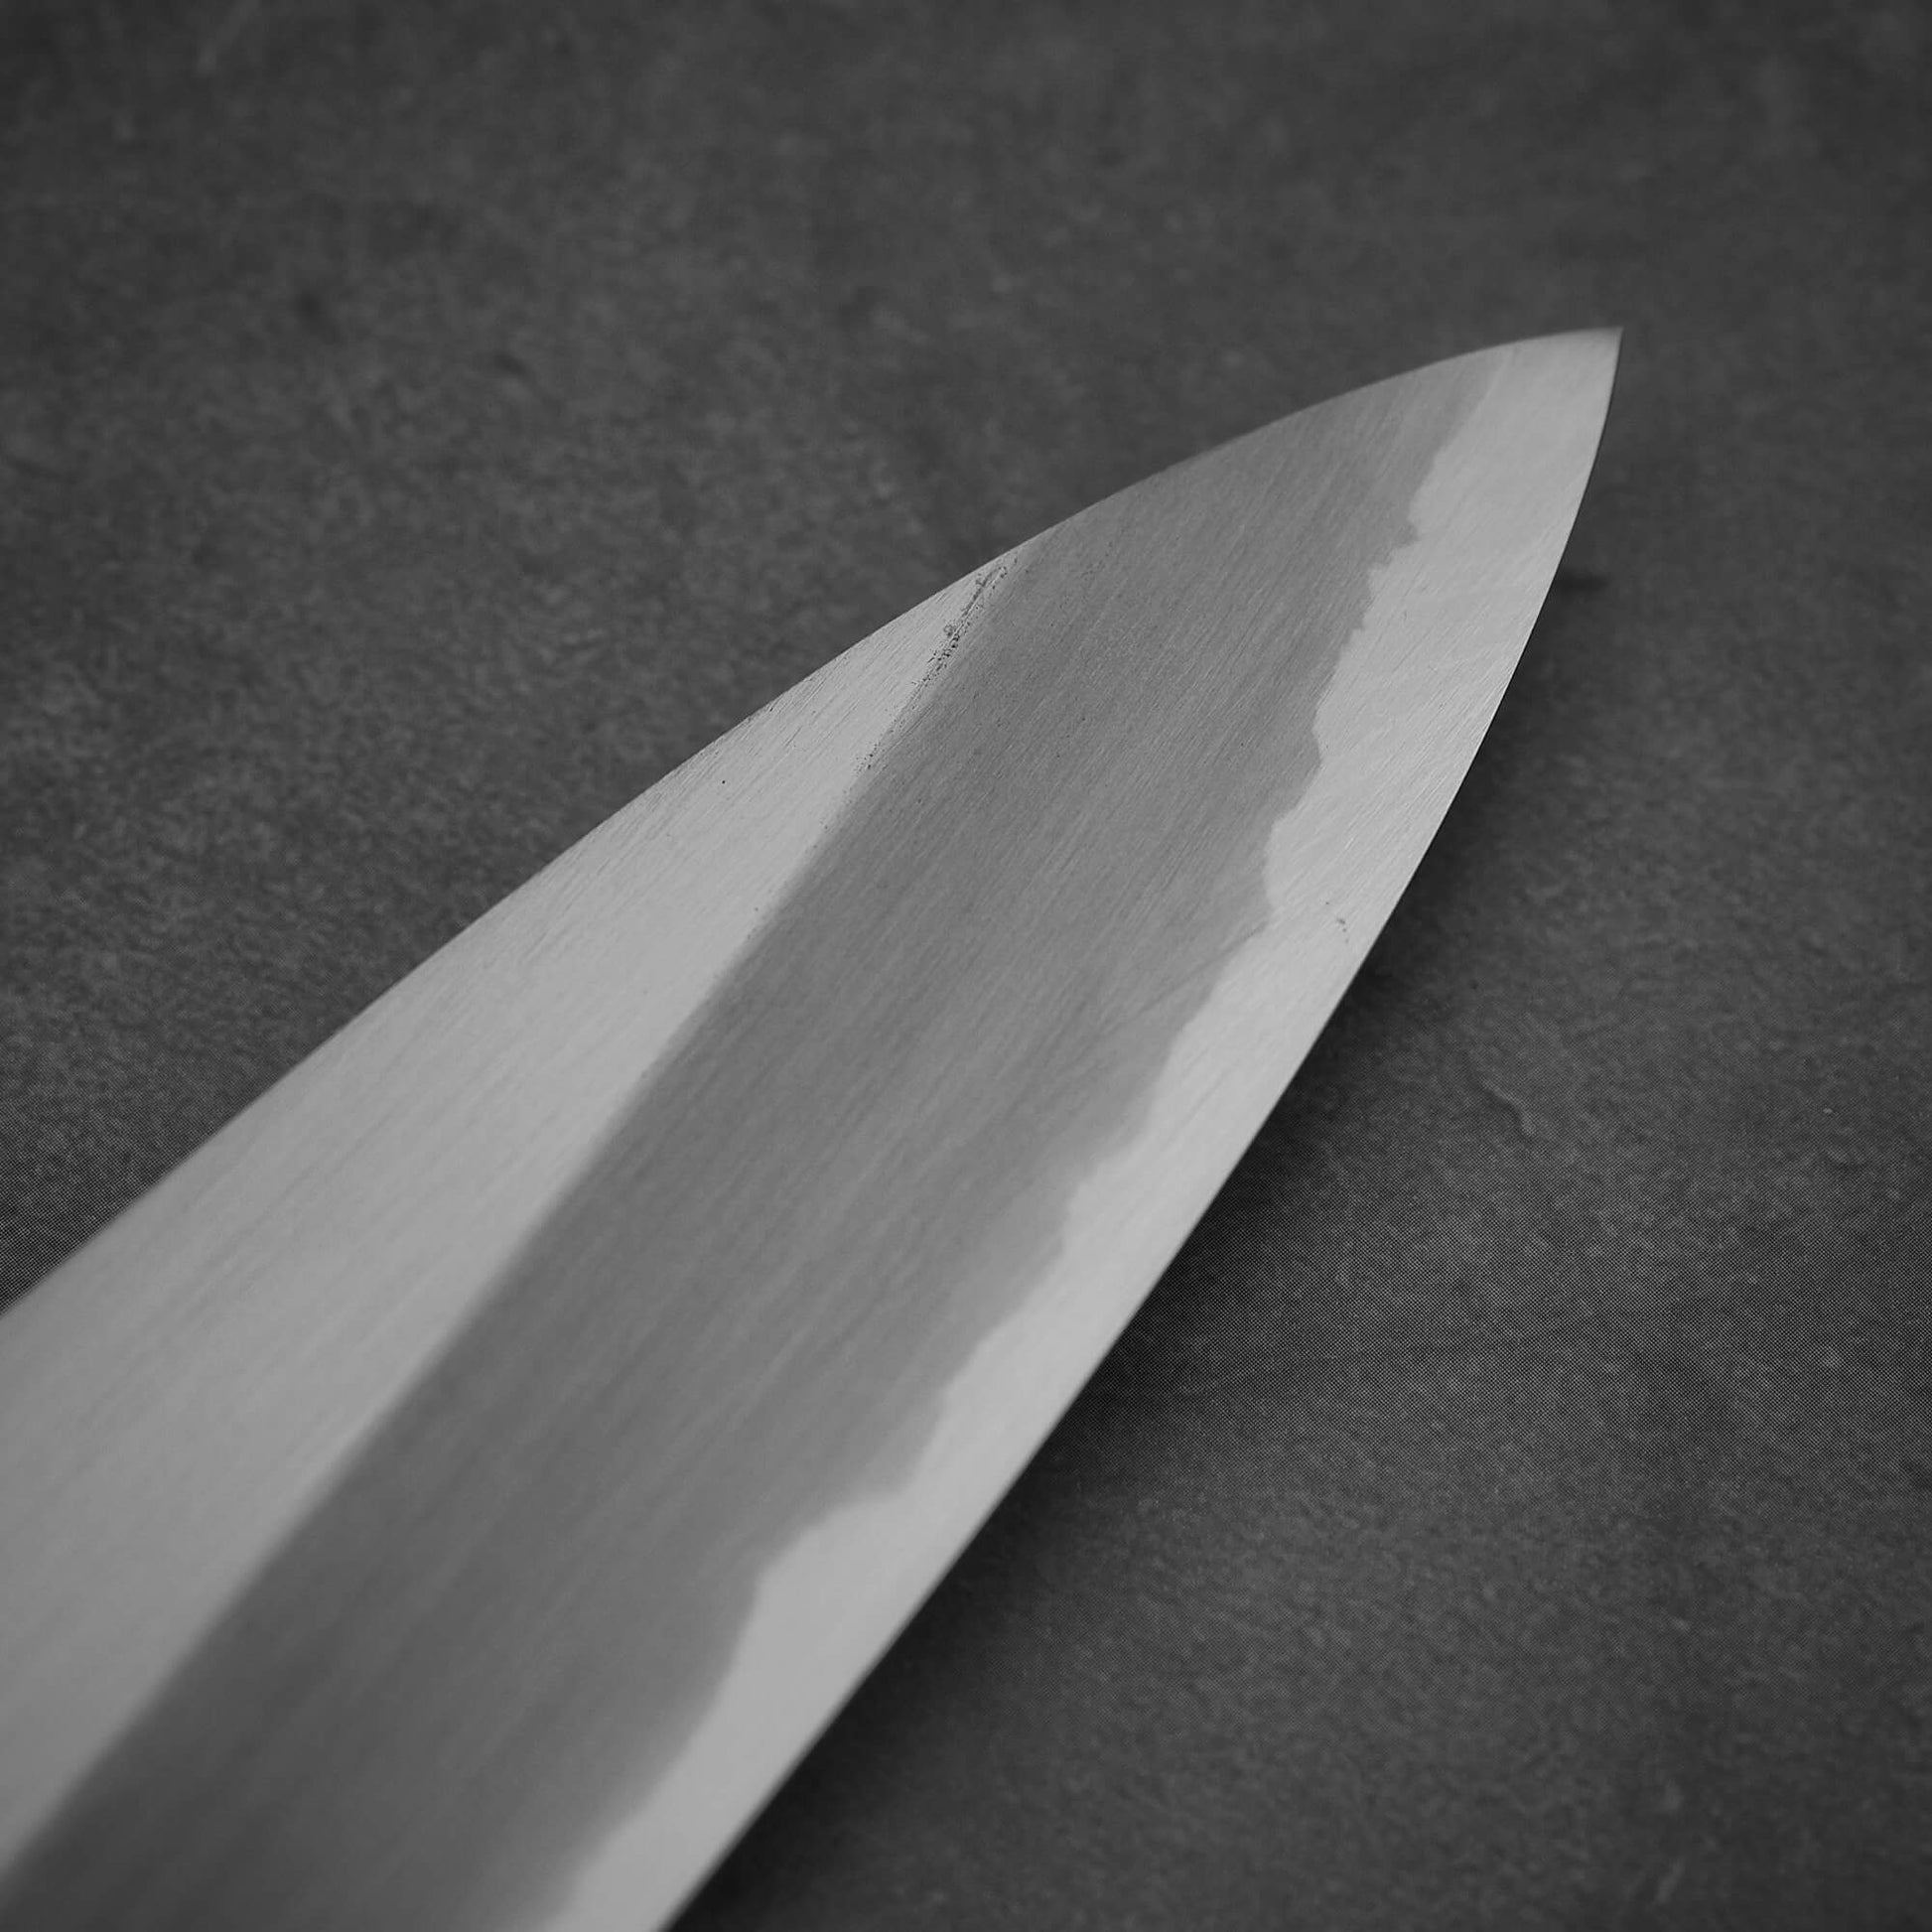 Close up view of the tip area of Nakagawa shinogi aogami#2 gyuto knife. Image shows right side of the blade